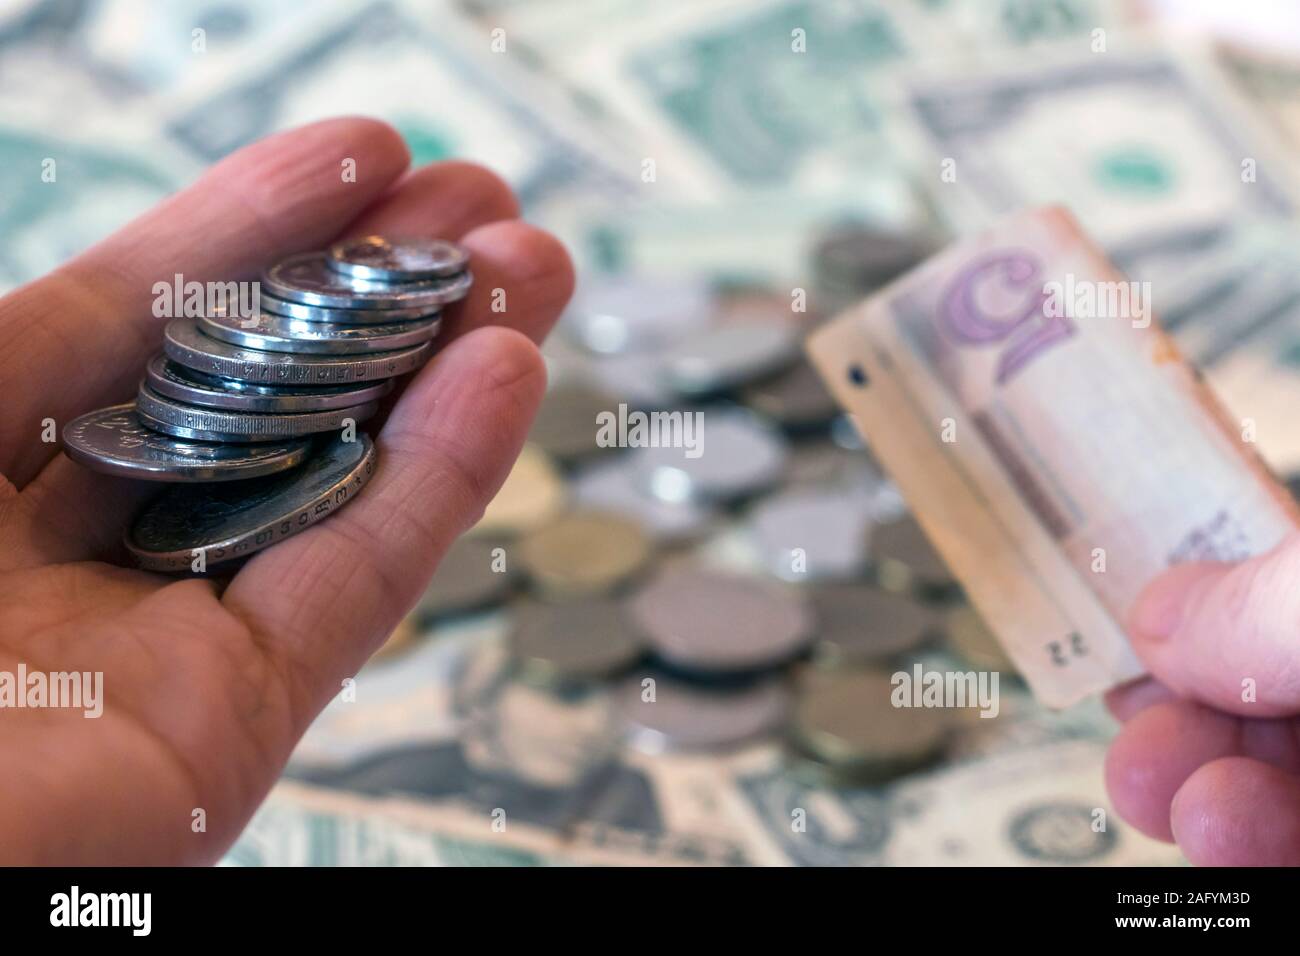 Hand holding georgian lari coins and banknotes against usd american dollar background with russian ruble rub coins. International currency and economy Stock Photo